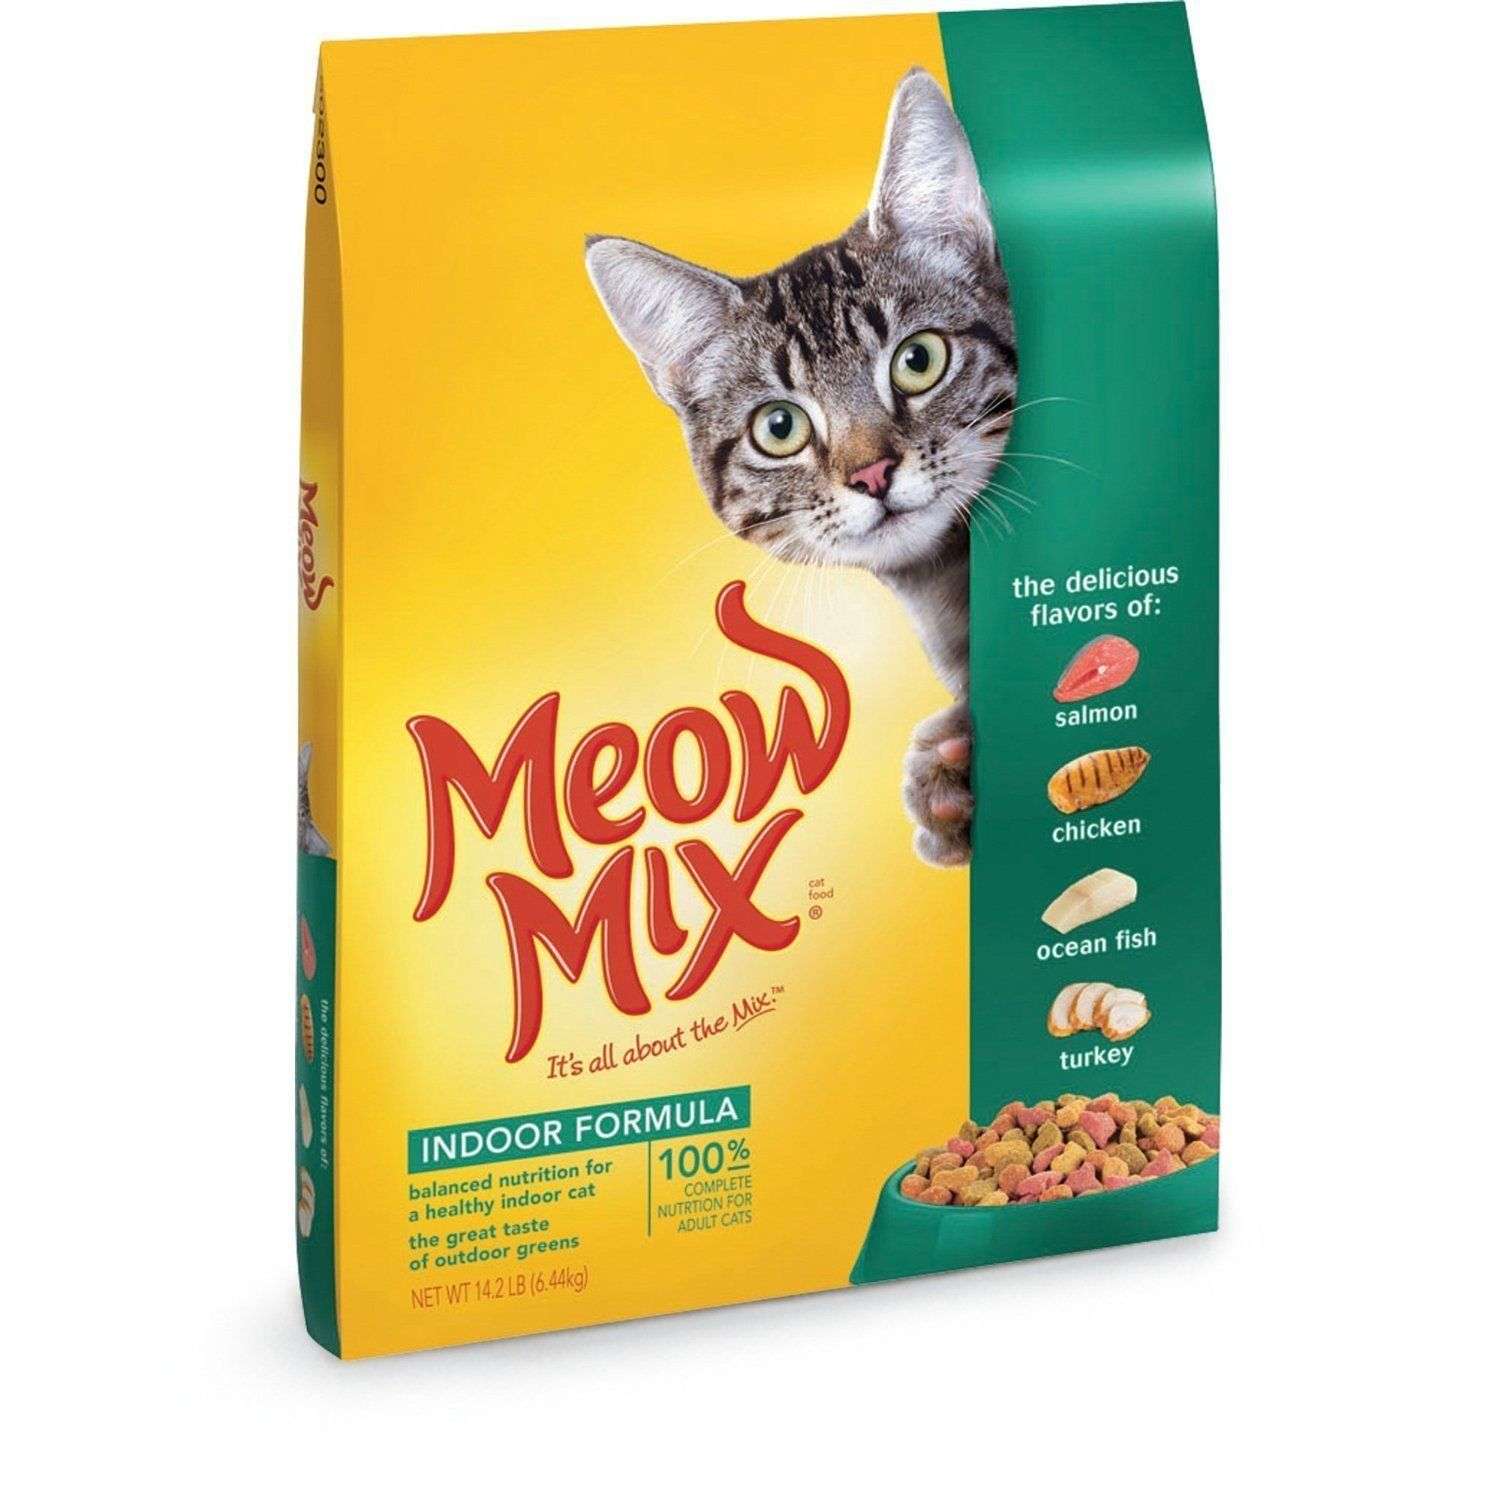 The Meow Mix Indoor Formula Dry Cat Food, 14.2